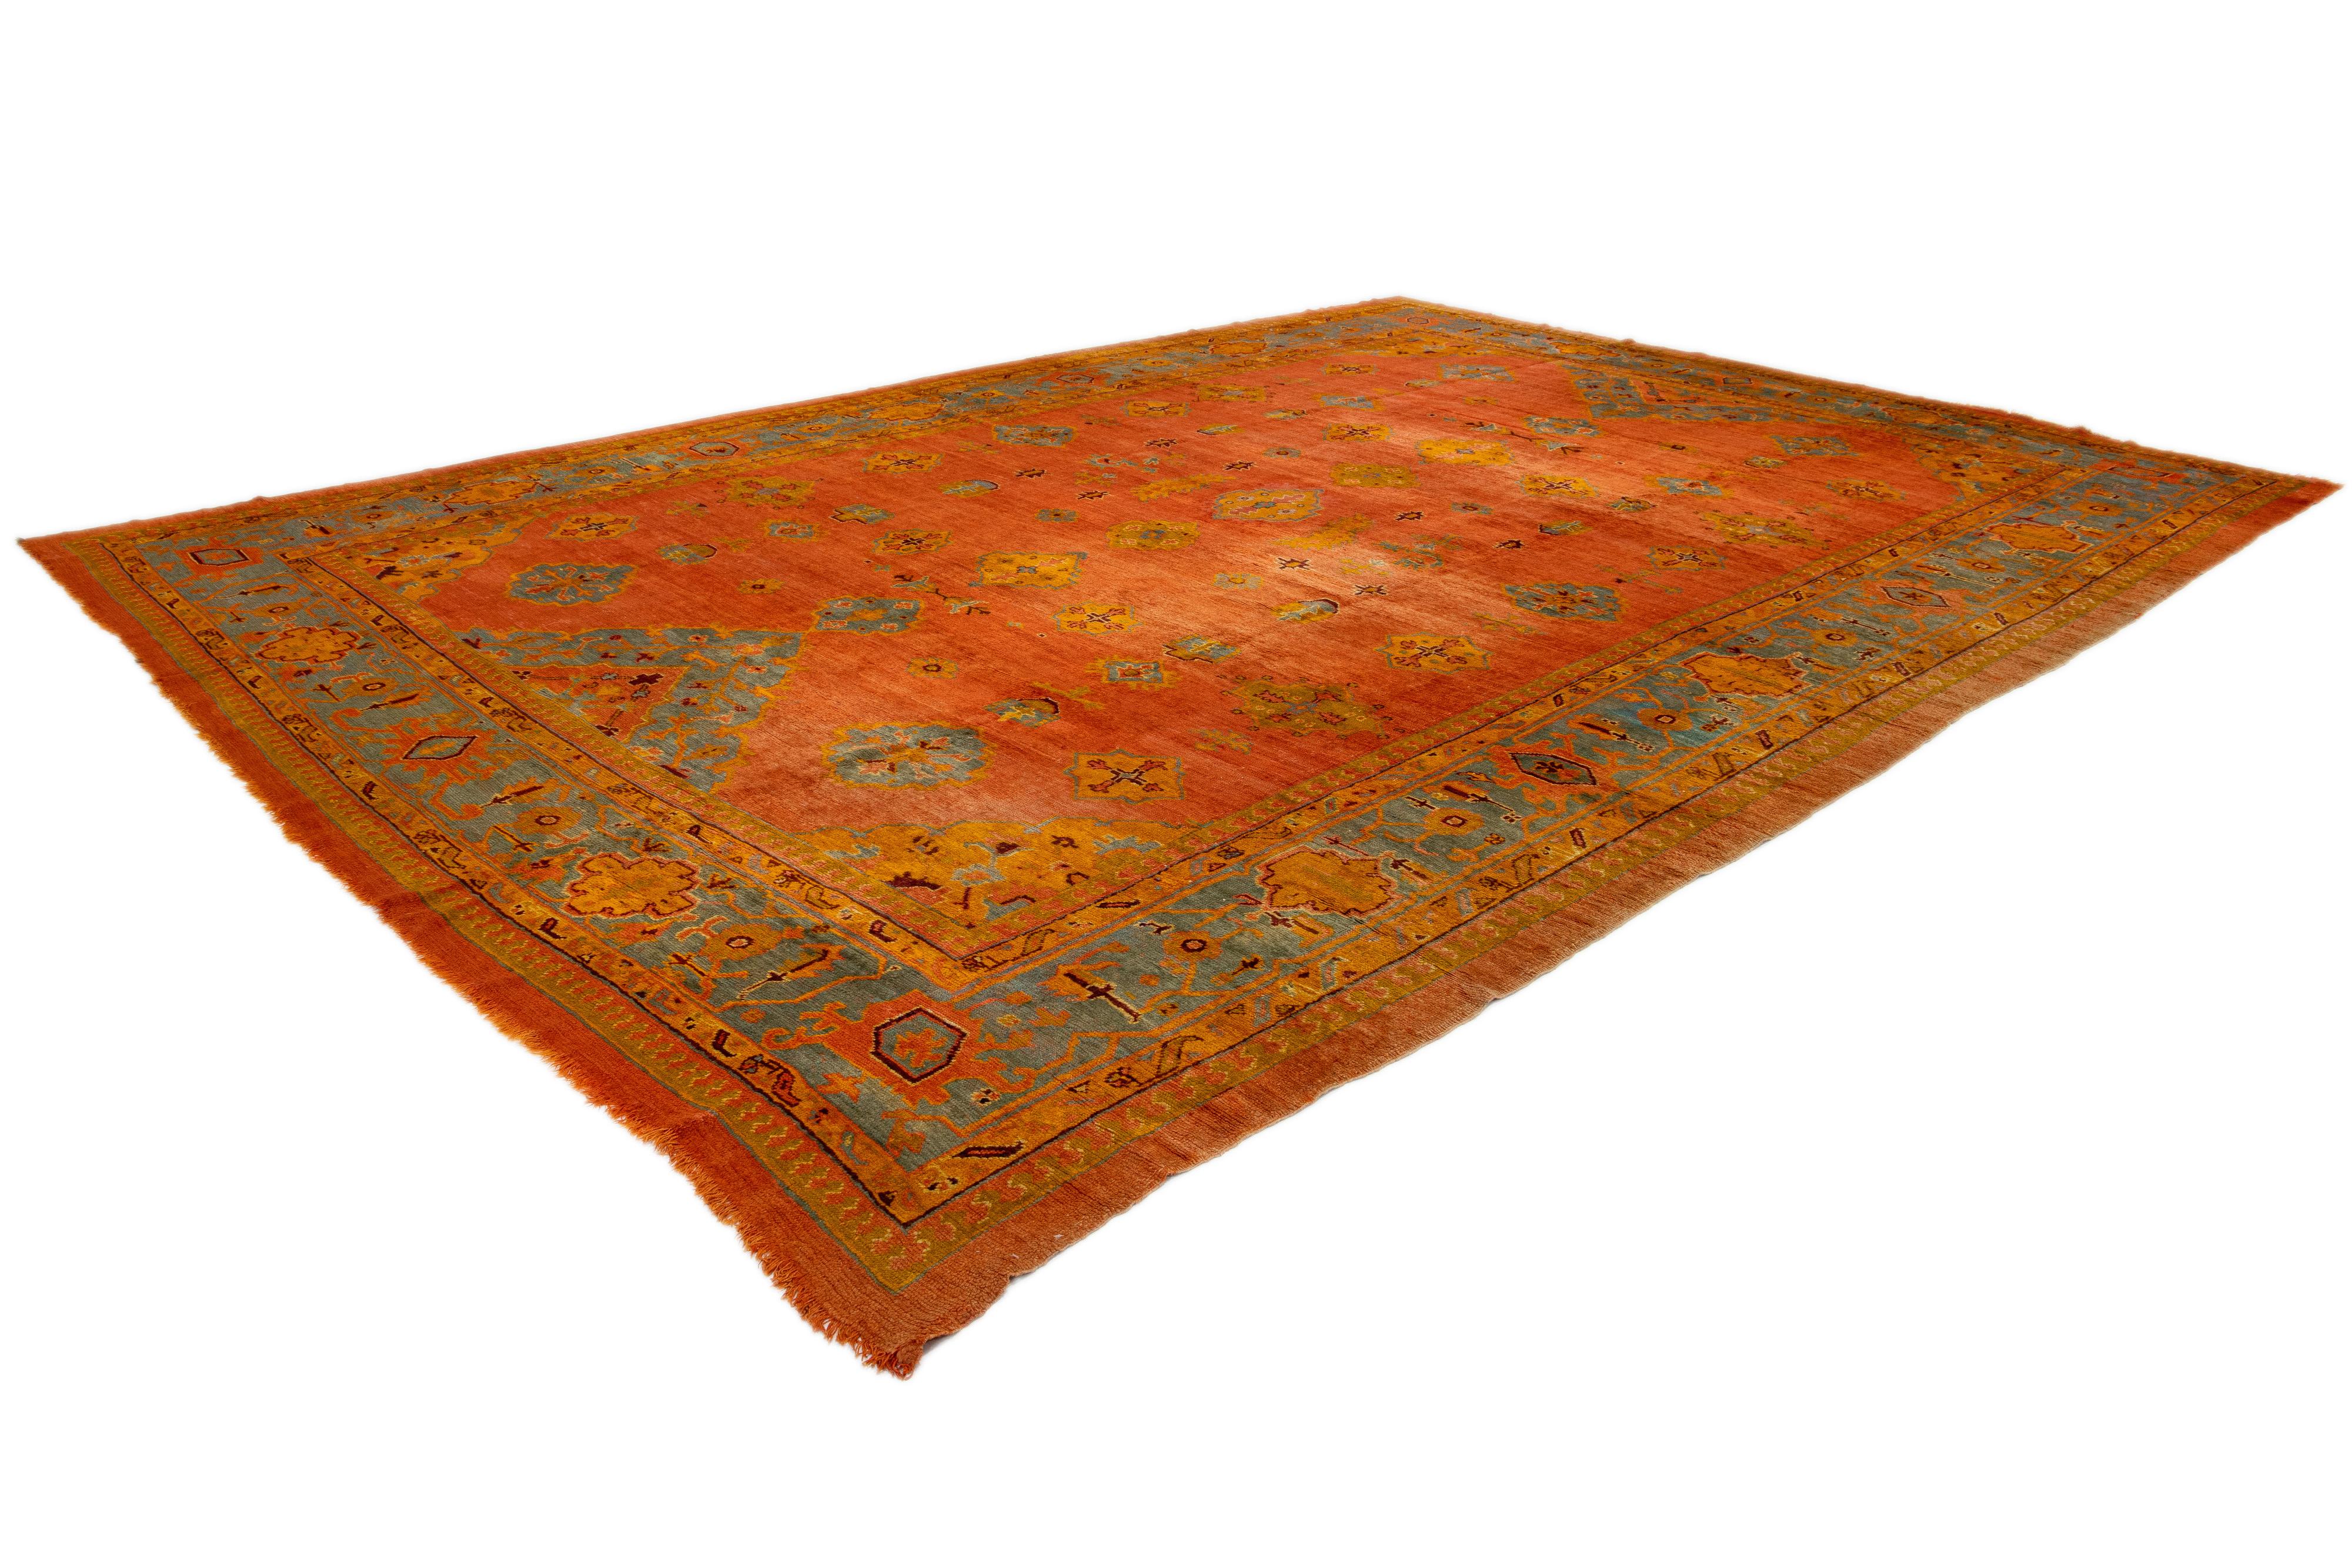 1880s Turkish Oushak Wool Rug Handmade In Red- Rust Featuring an Allover Motif  For Sale 4